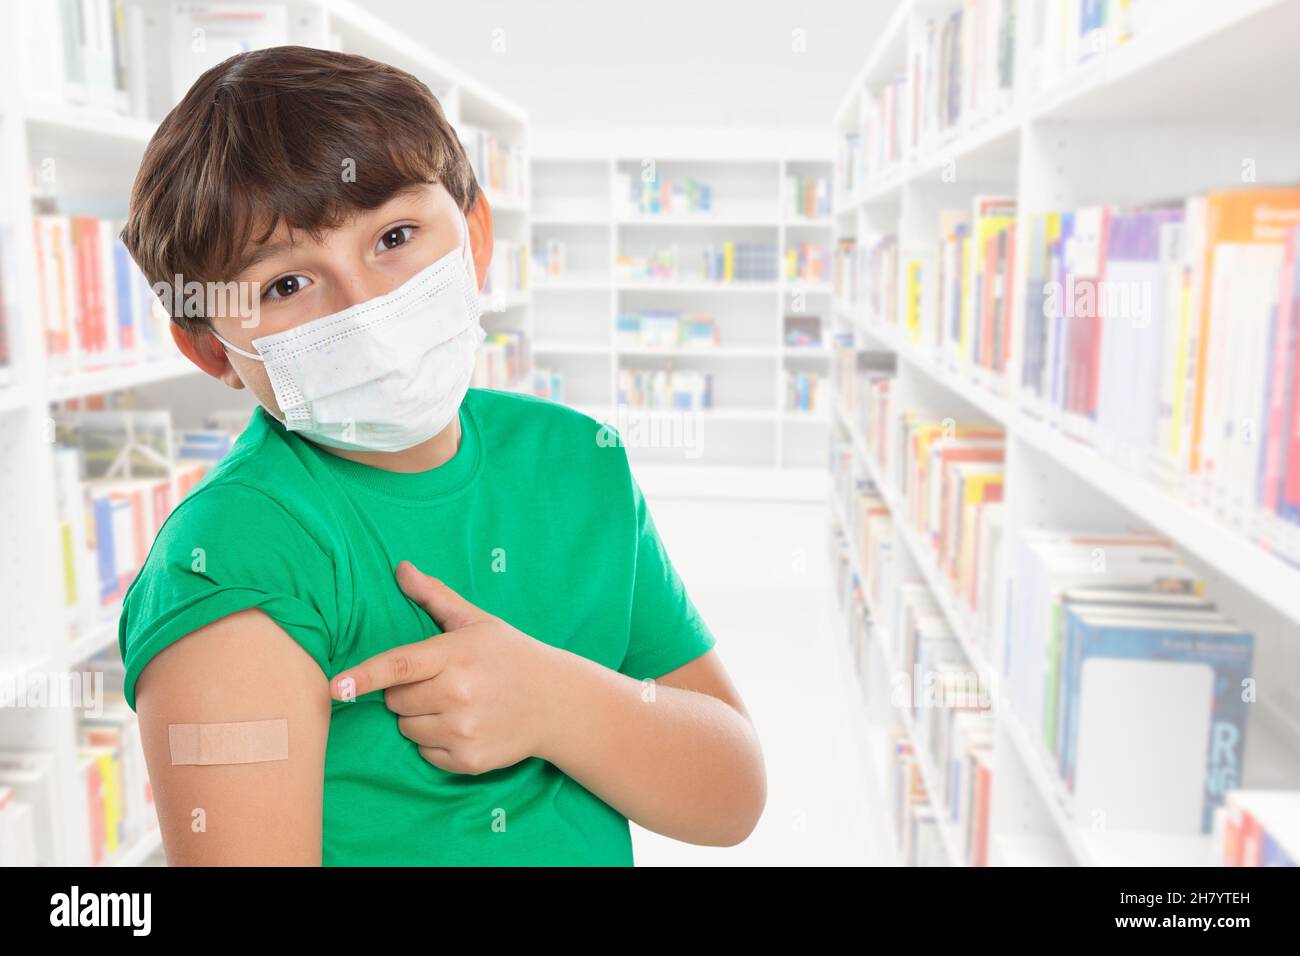 Child kid pointing on plaster after Coronavirus vaccination at school wearing face mask against Corona Virus COVID-19 Covid copyspace copy space latin Stock Photo